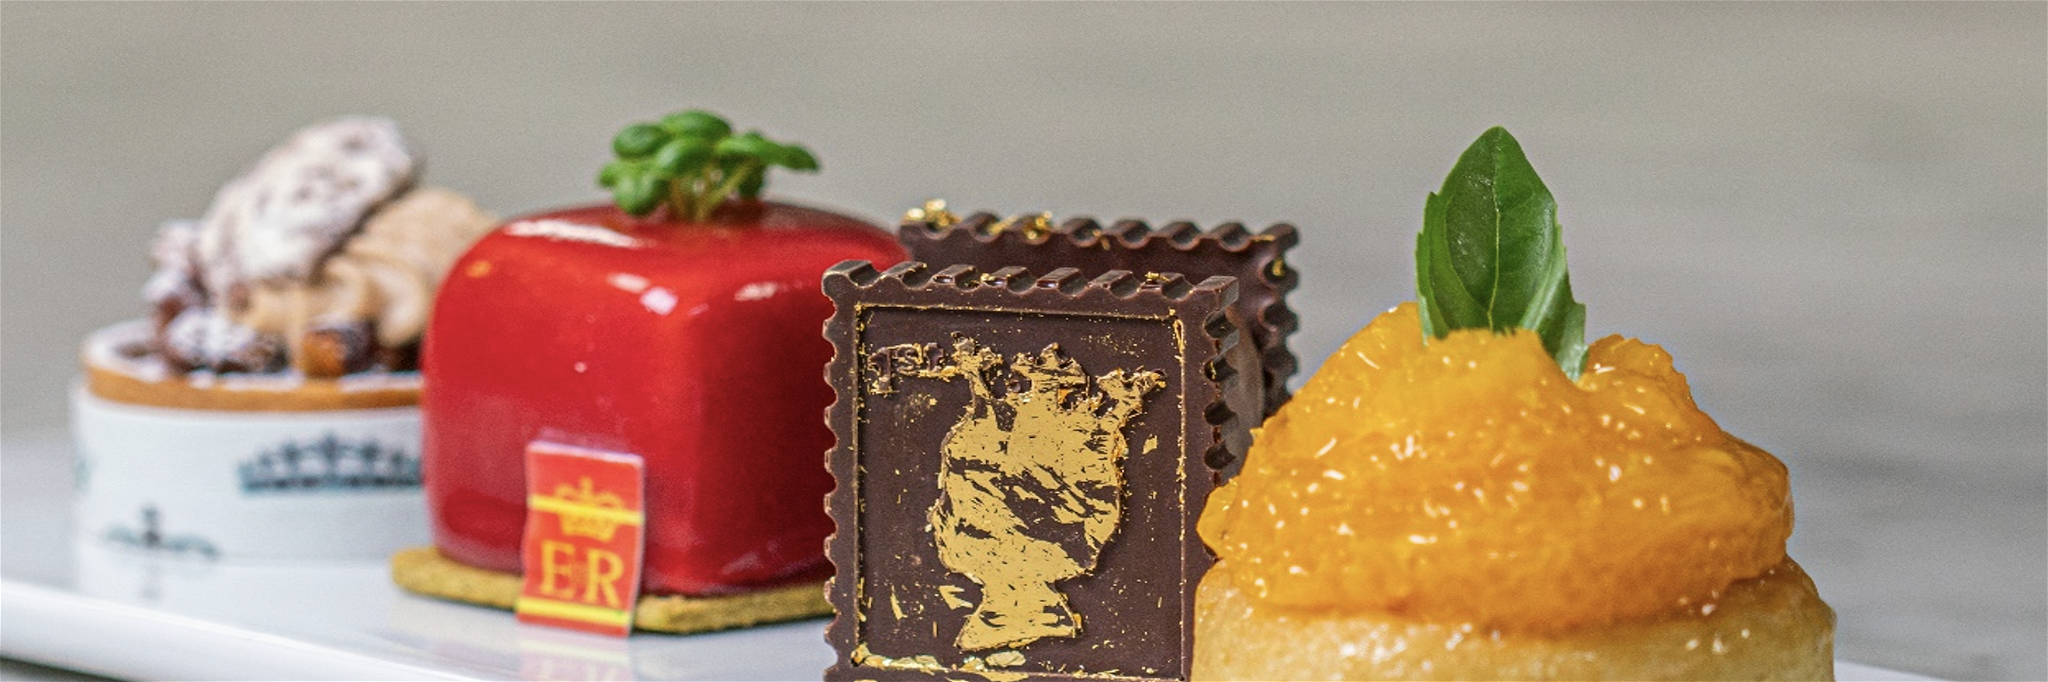 Some of the Royal Tea delicacies at the Conrad London St. James.